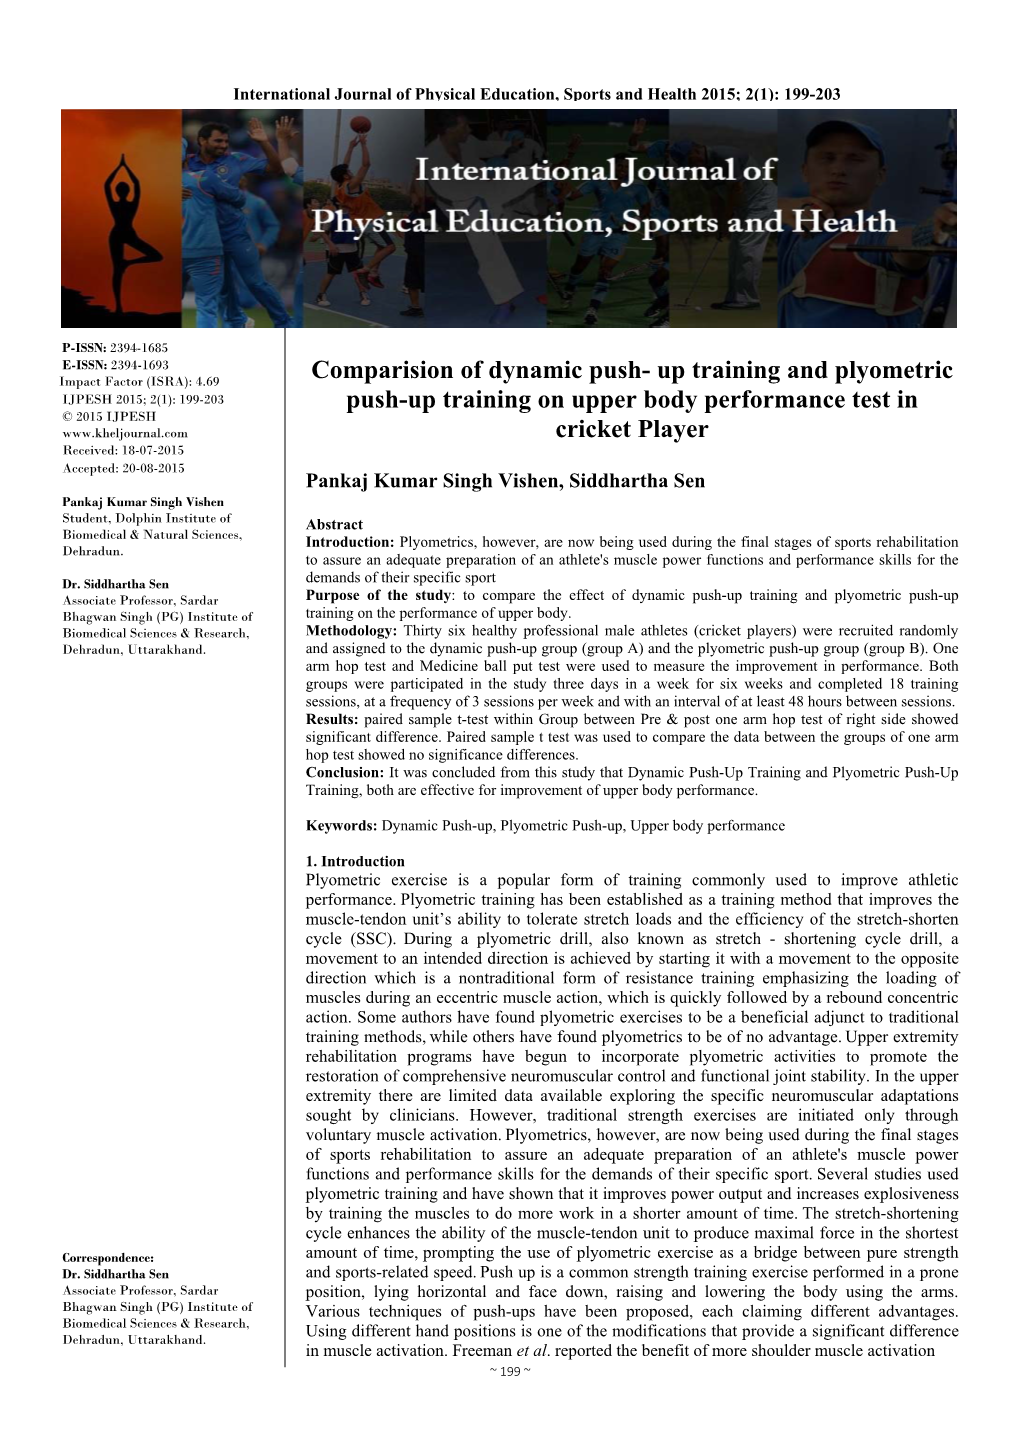 Comparision of Dynamic Push- up Training and Plyometric Push-Up Training on Upper Body Performance Test in Cricket Player